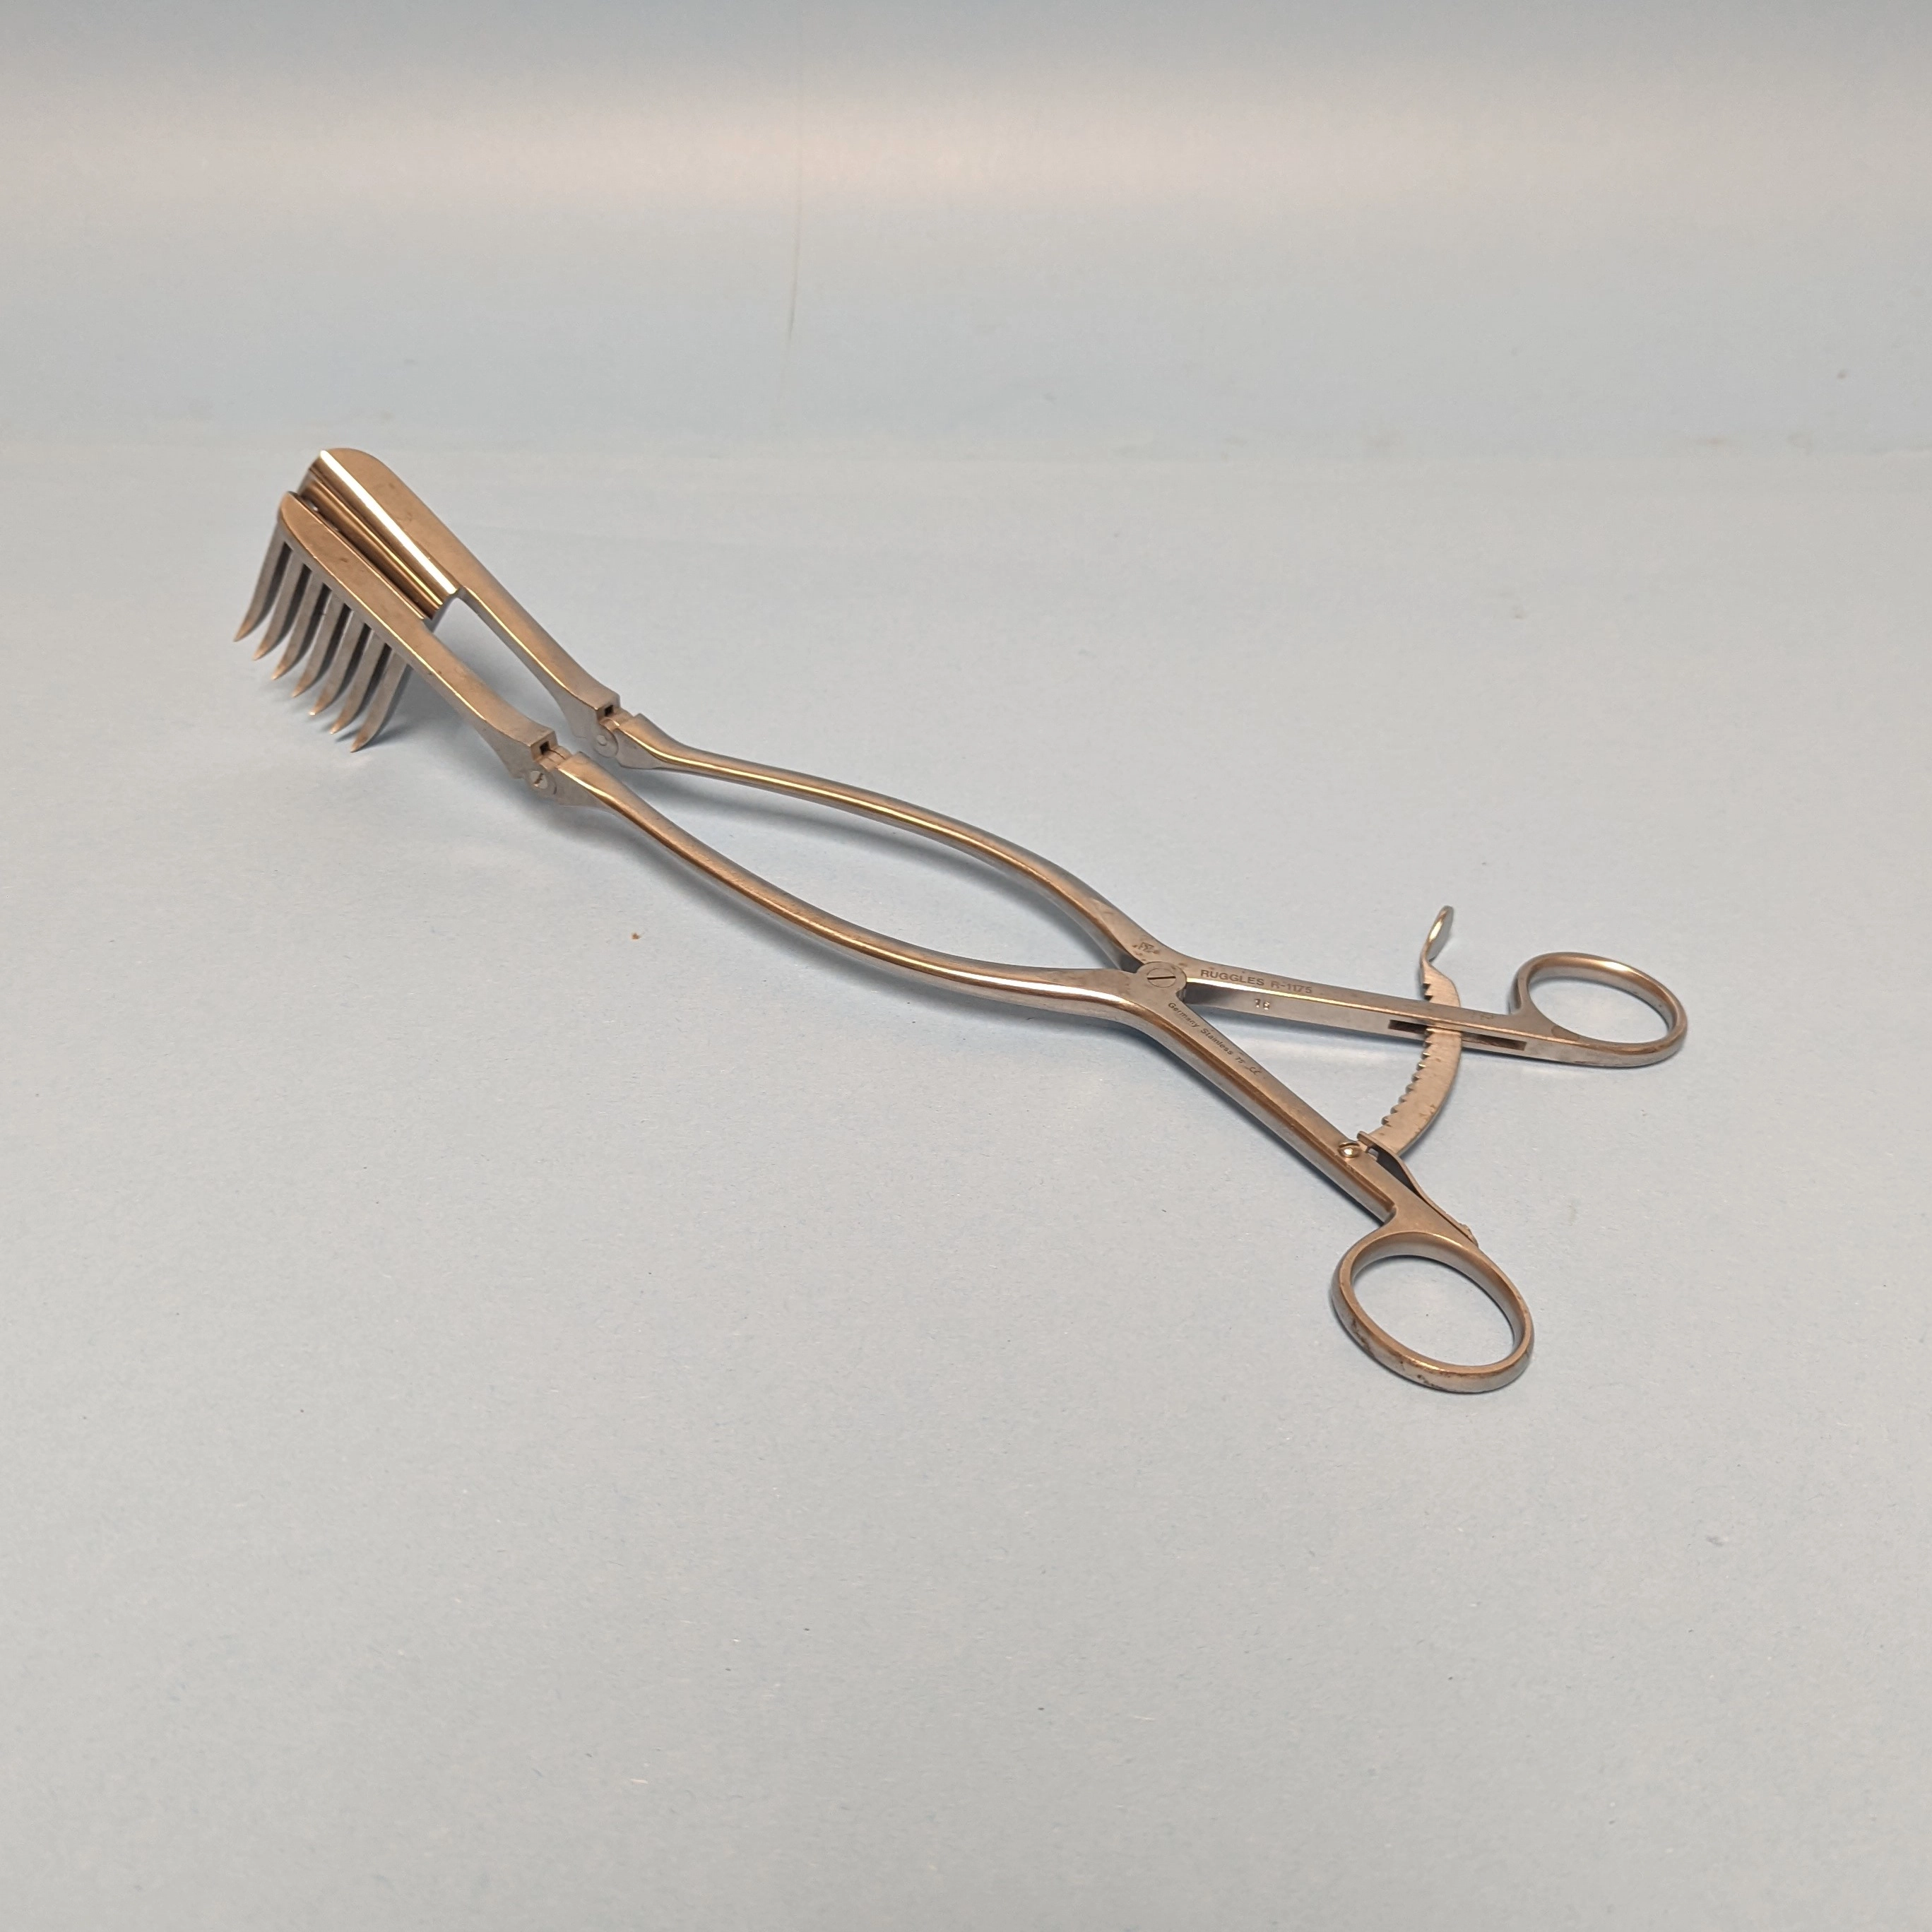 Beckman Retractor Ruggles R1175 Hinged Arms 7 x 7 Wide Sharp Prongs, 48mm, 12-3/4"